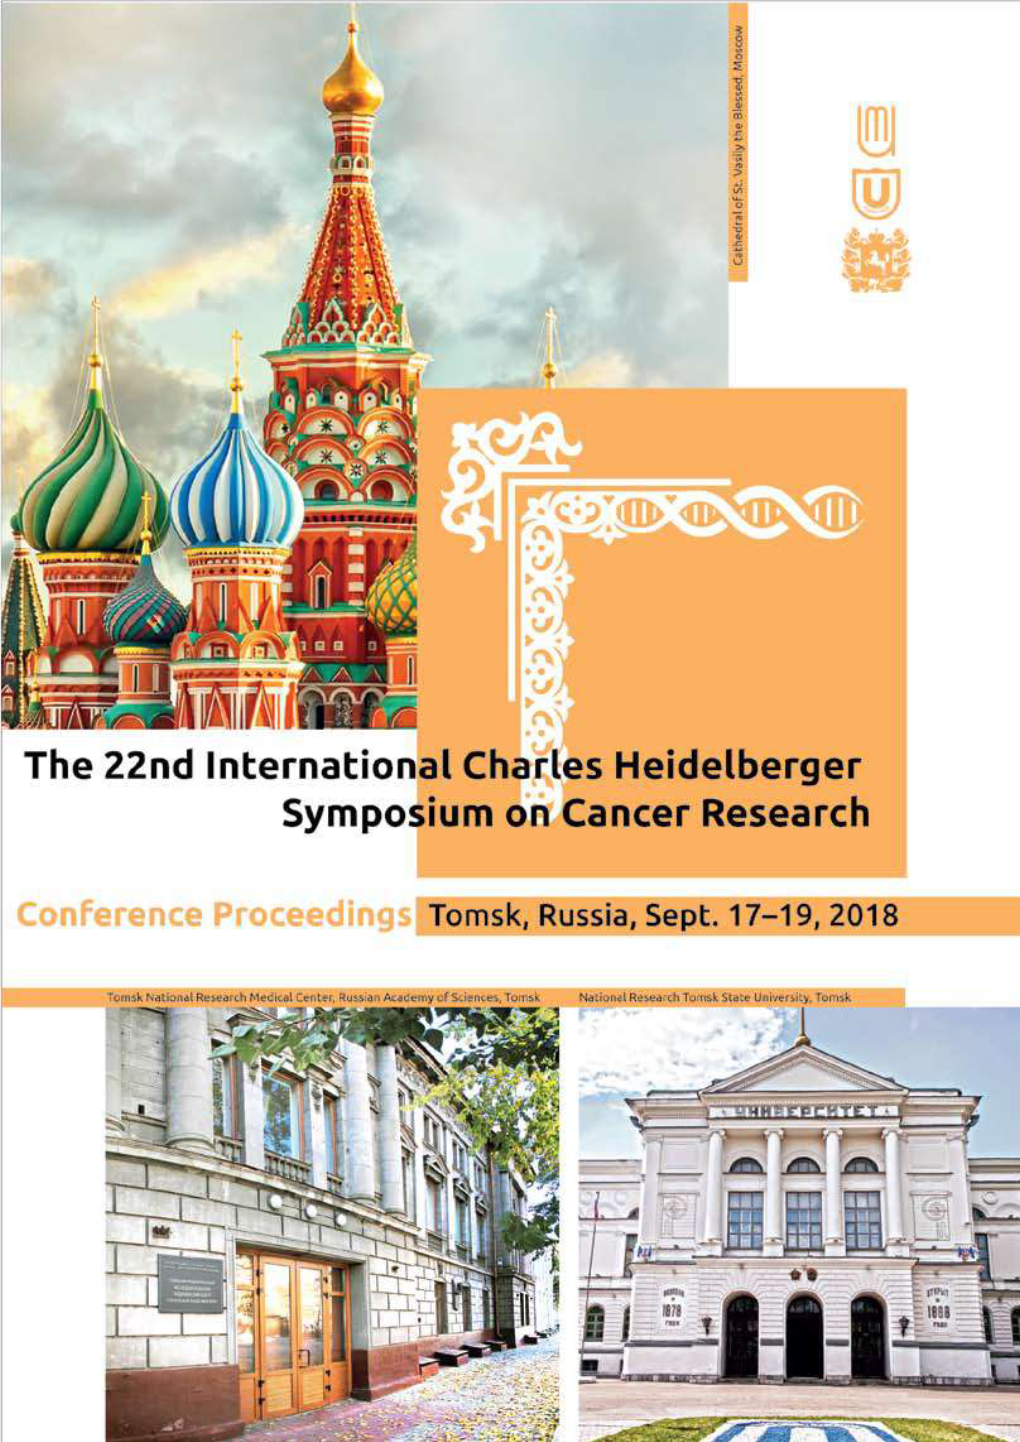 The 22Nd International Charles Heidelberger Symposium on Cancer Research